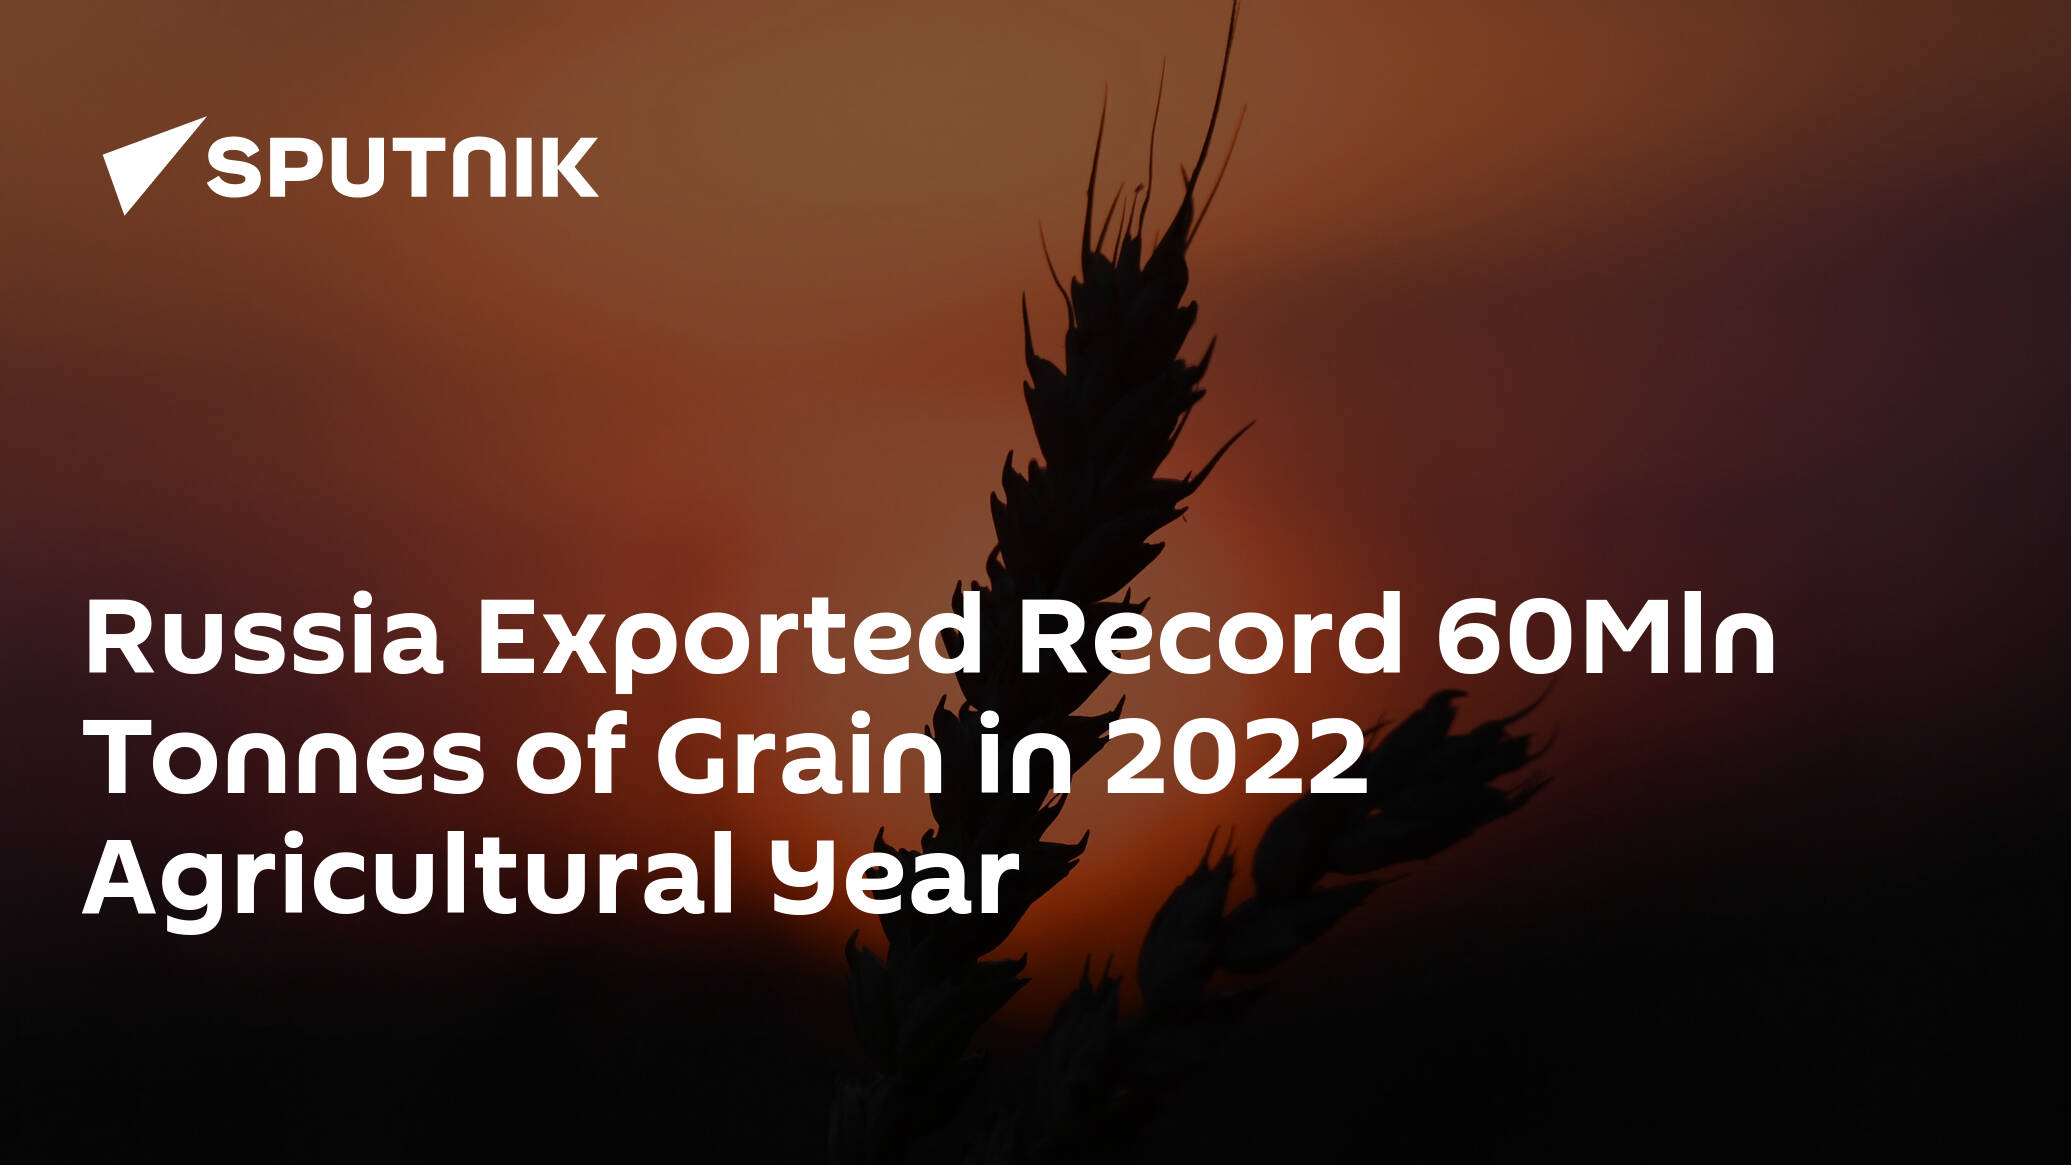 Russia Exported Record 60Mln Tonnes of Grain in 2022 Agricultural Year